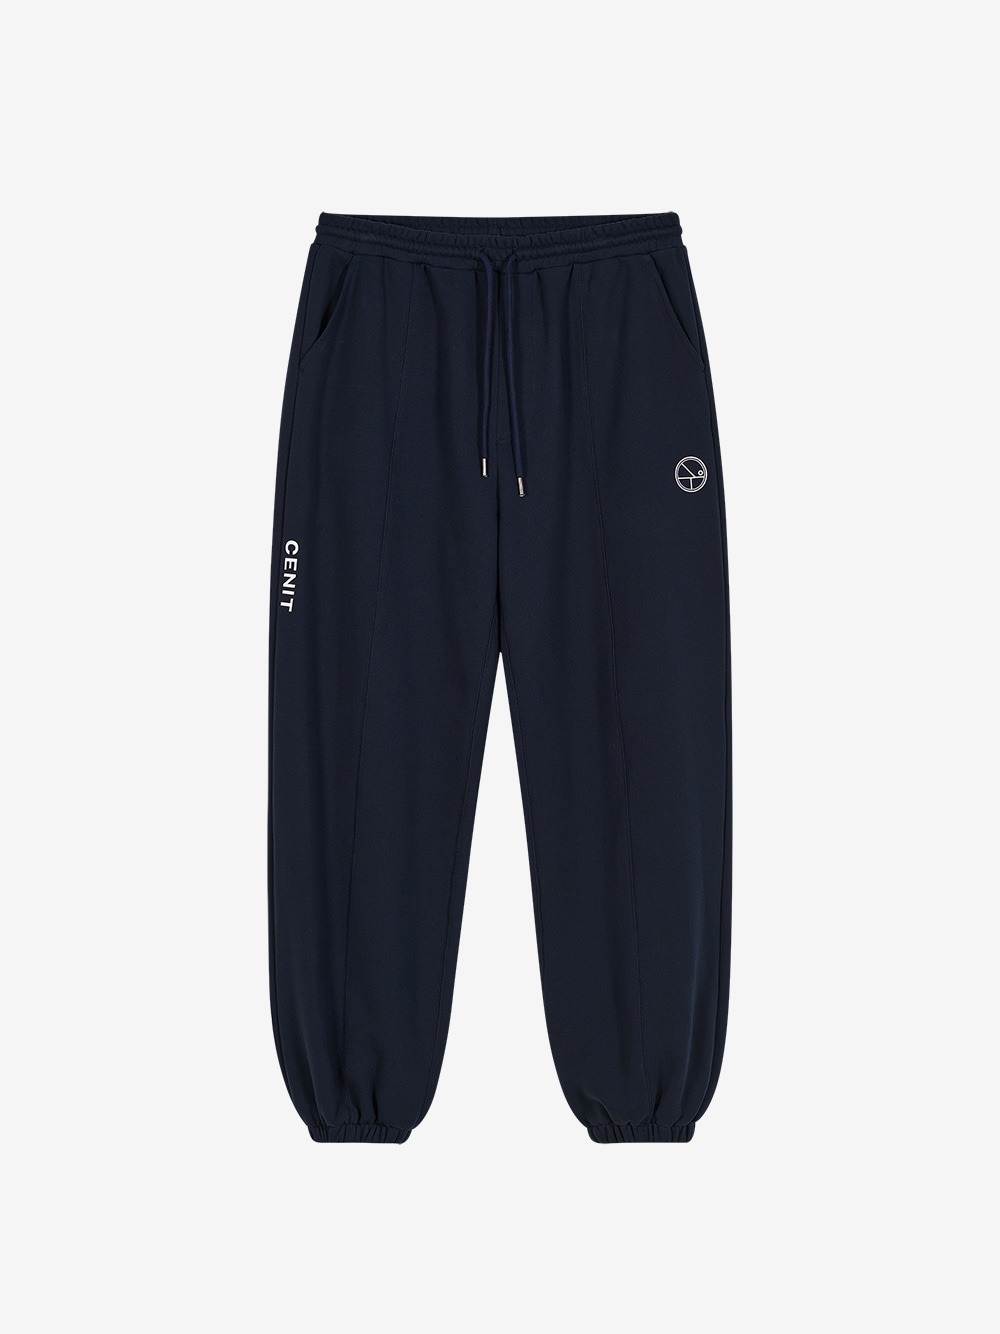 CENIT WIDE JOGGER PANTS _ NAVY